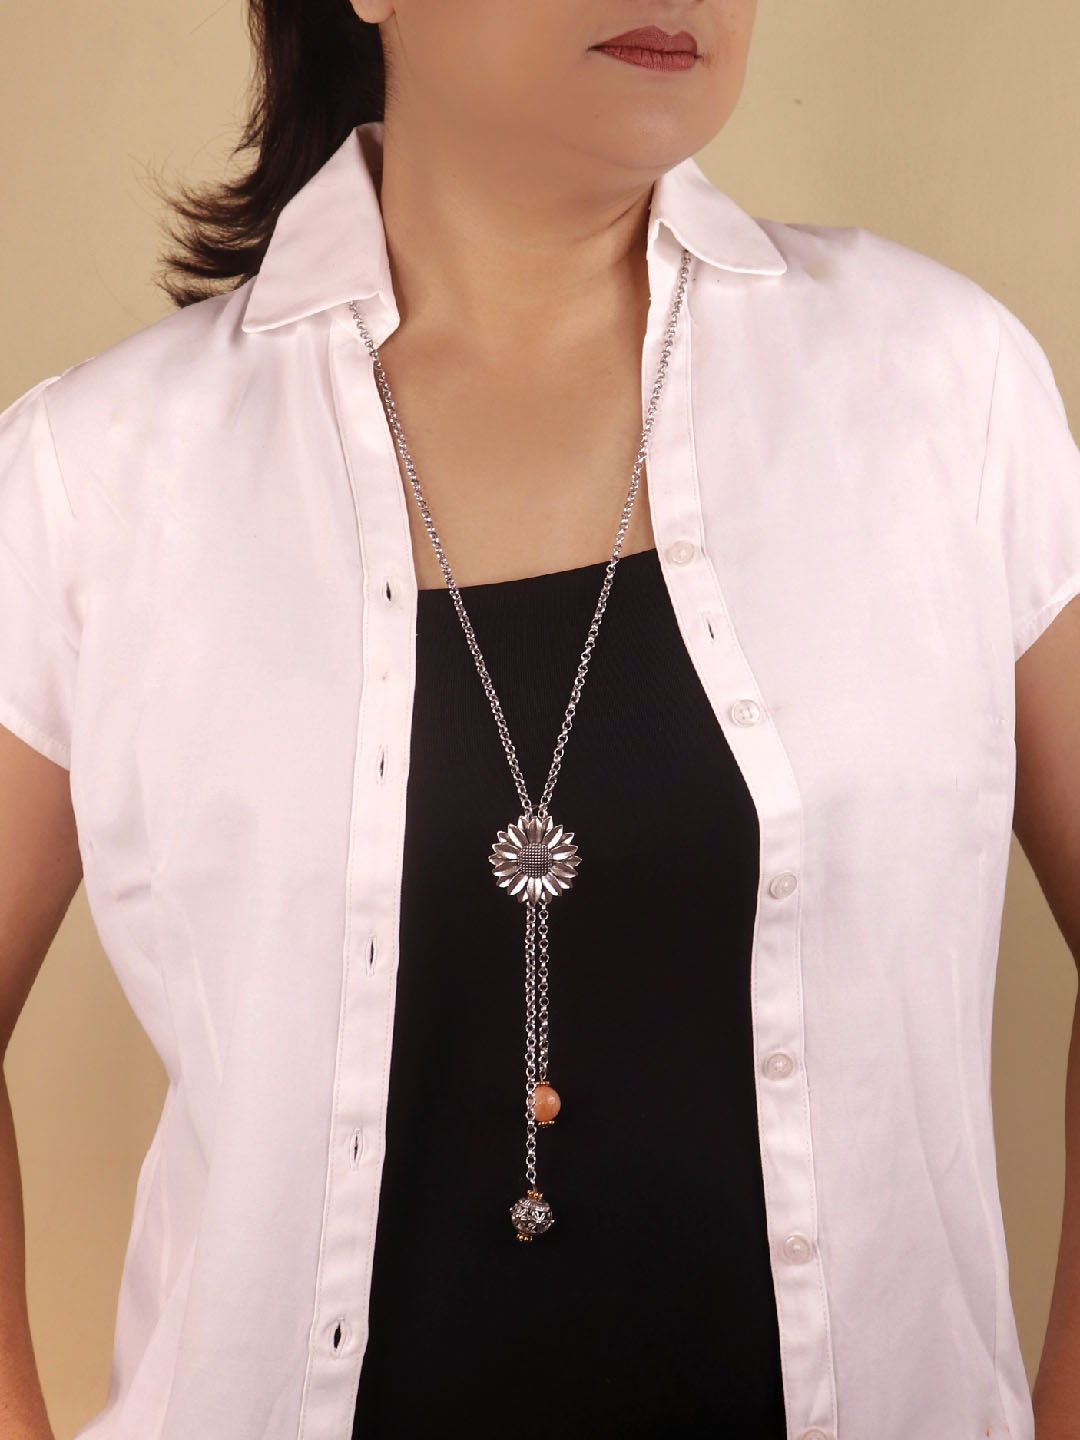 The pendant has an intricate design with a long temple jewellery patte –  Look Ethnic